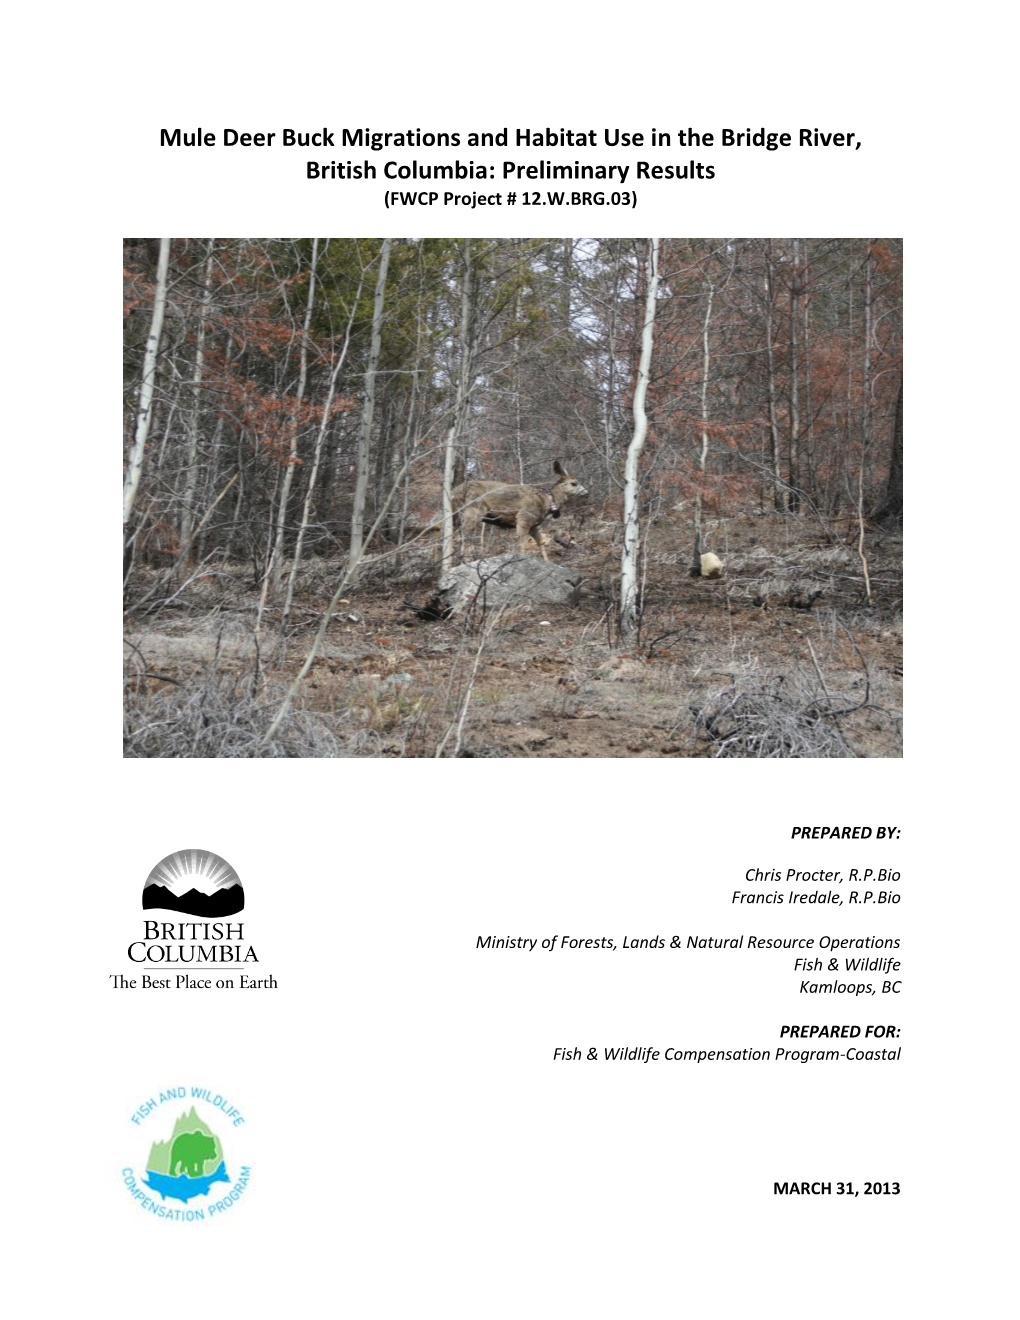 Mule Deer Buck Migrations and Habitat Use in the Bridge River, British Columbia: Preliminary Results (FWCP Project # 12.W.BRG.03)